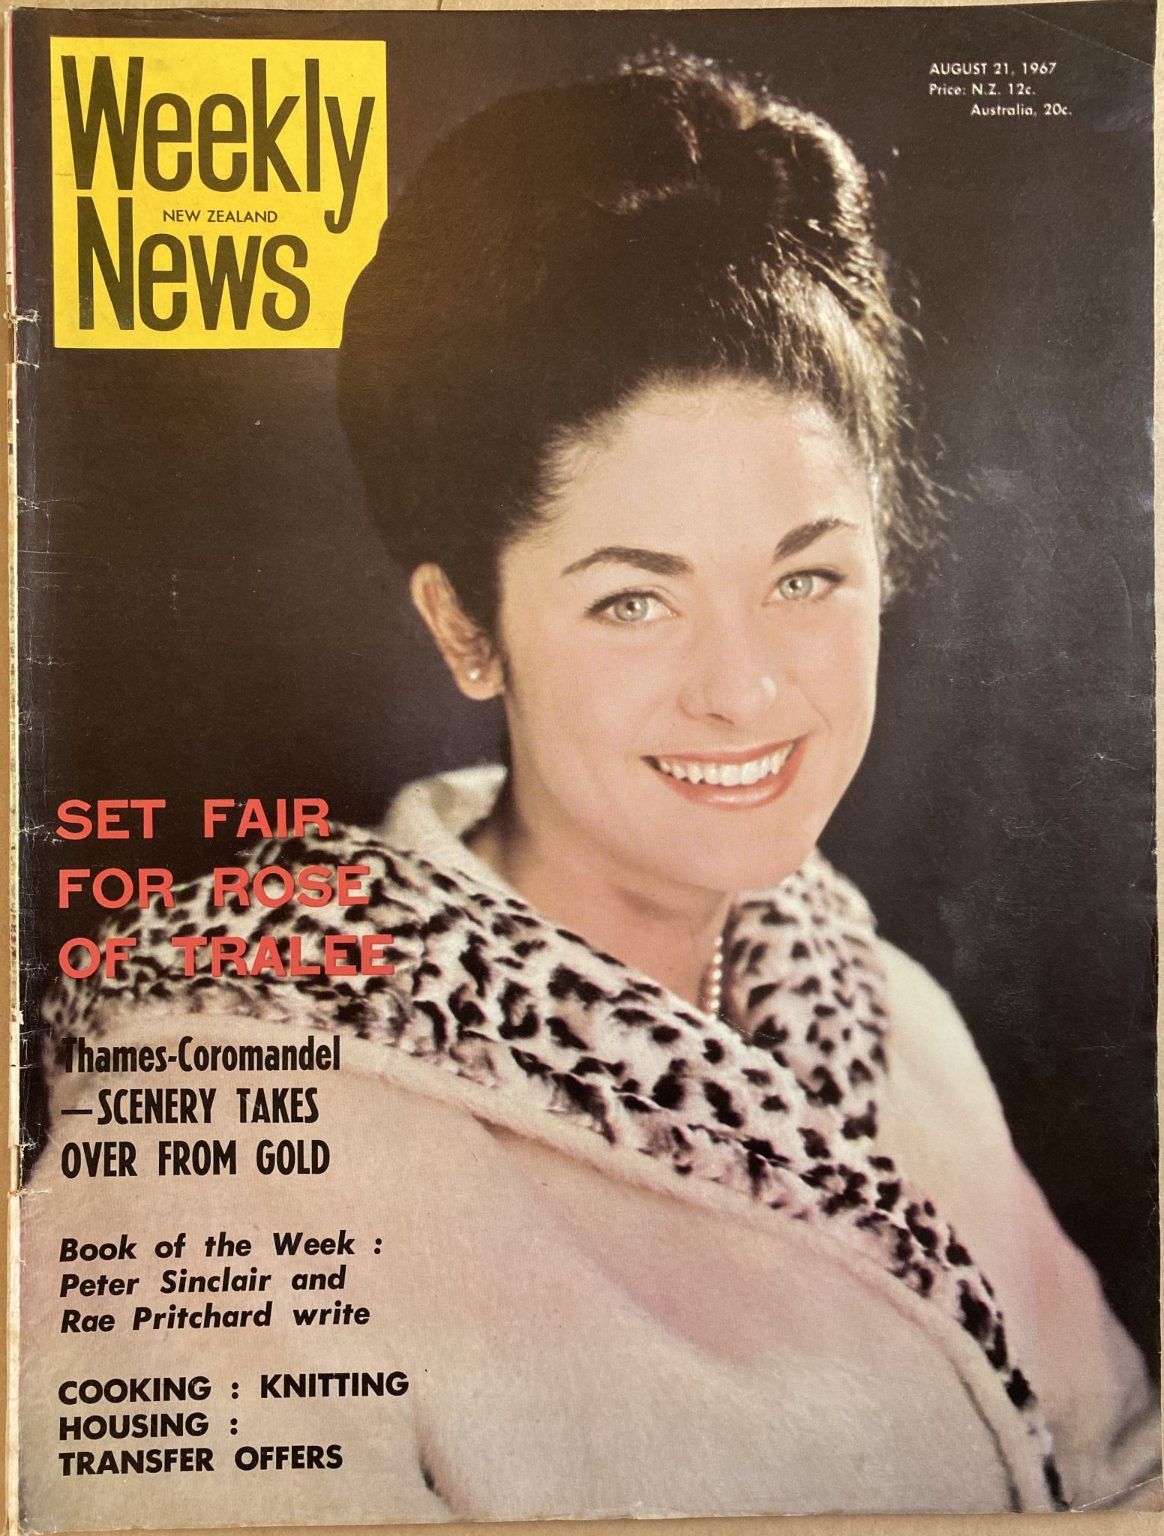 OLD NEWSPAPER: New Zealand Weekly News, No. 5412, 21 August 1967